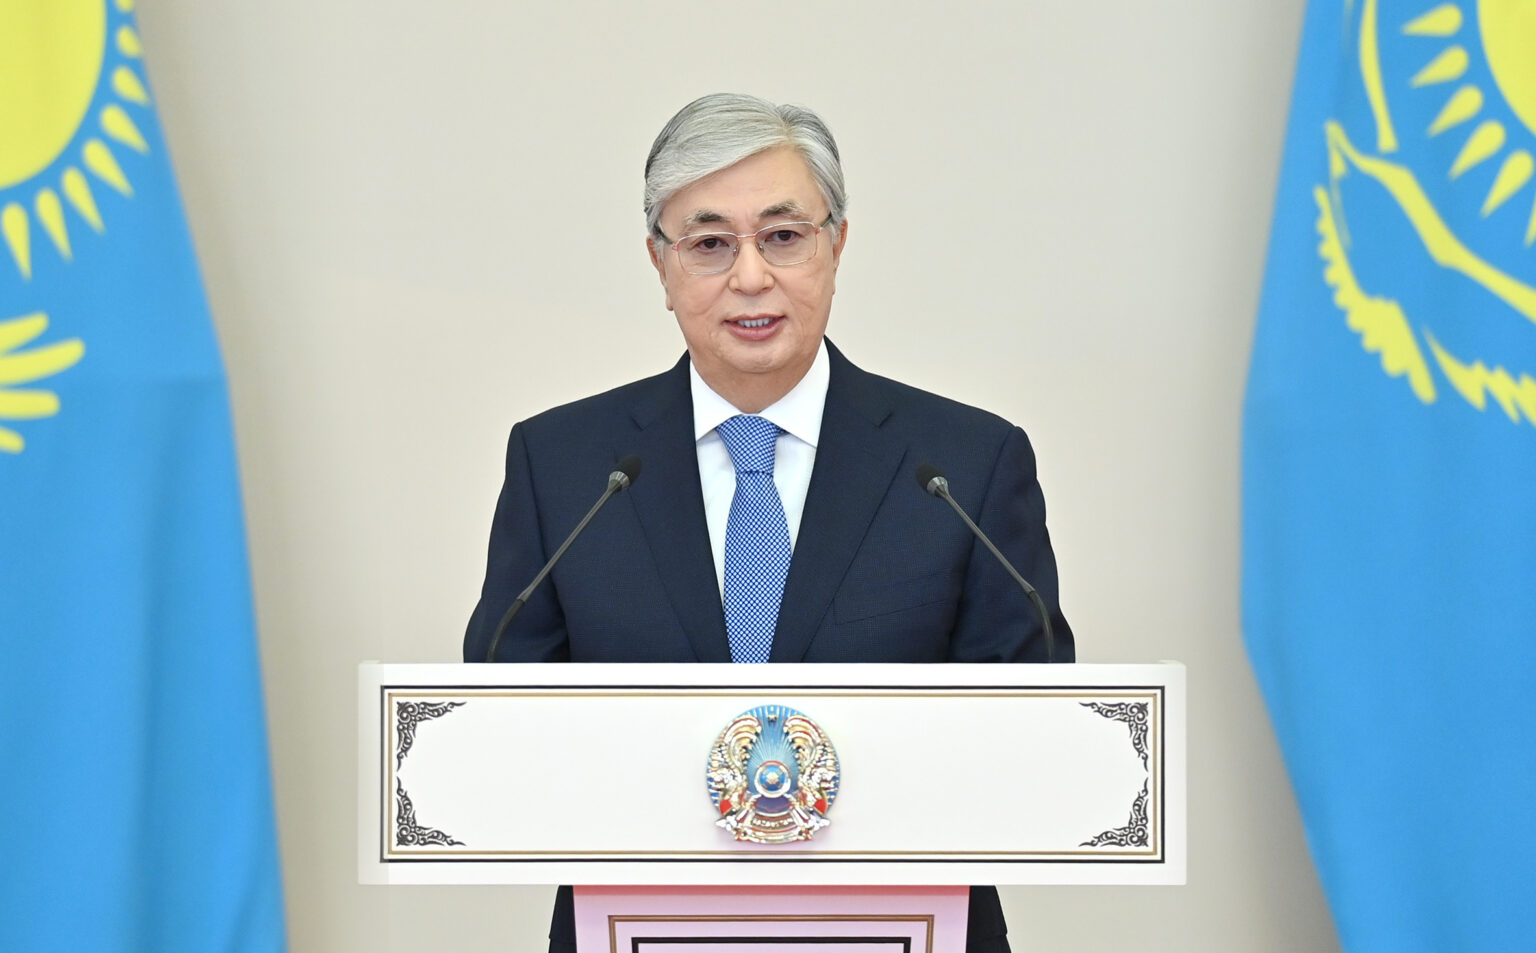 President Tokayev Presents State Awards in Run-Up to Independence Day